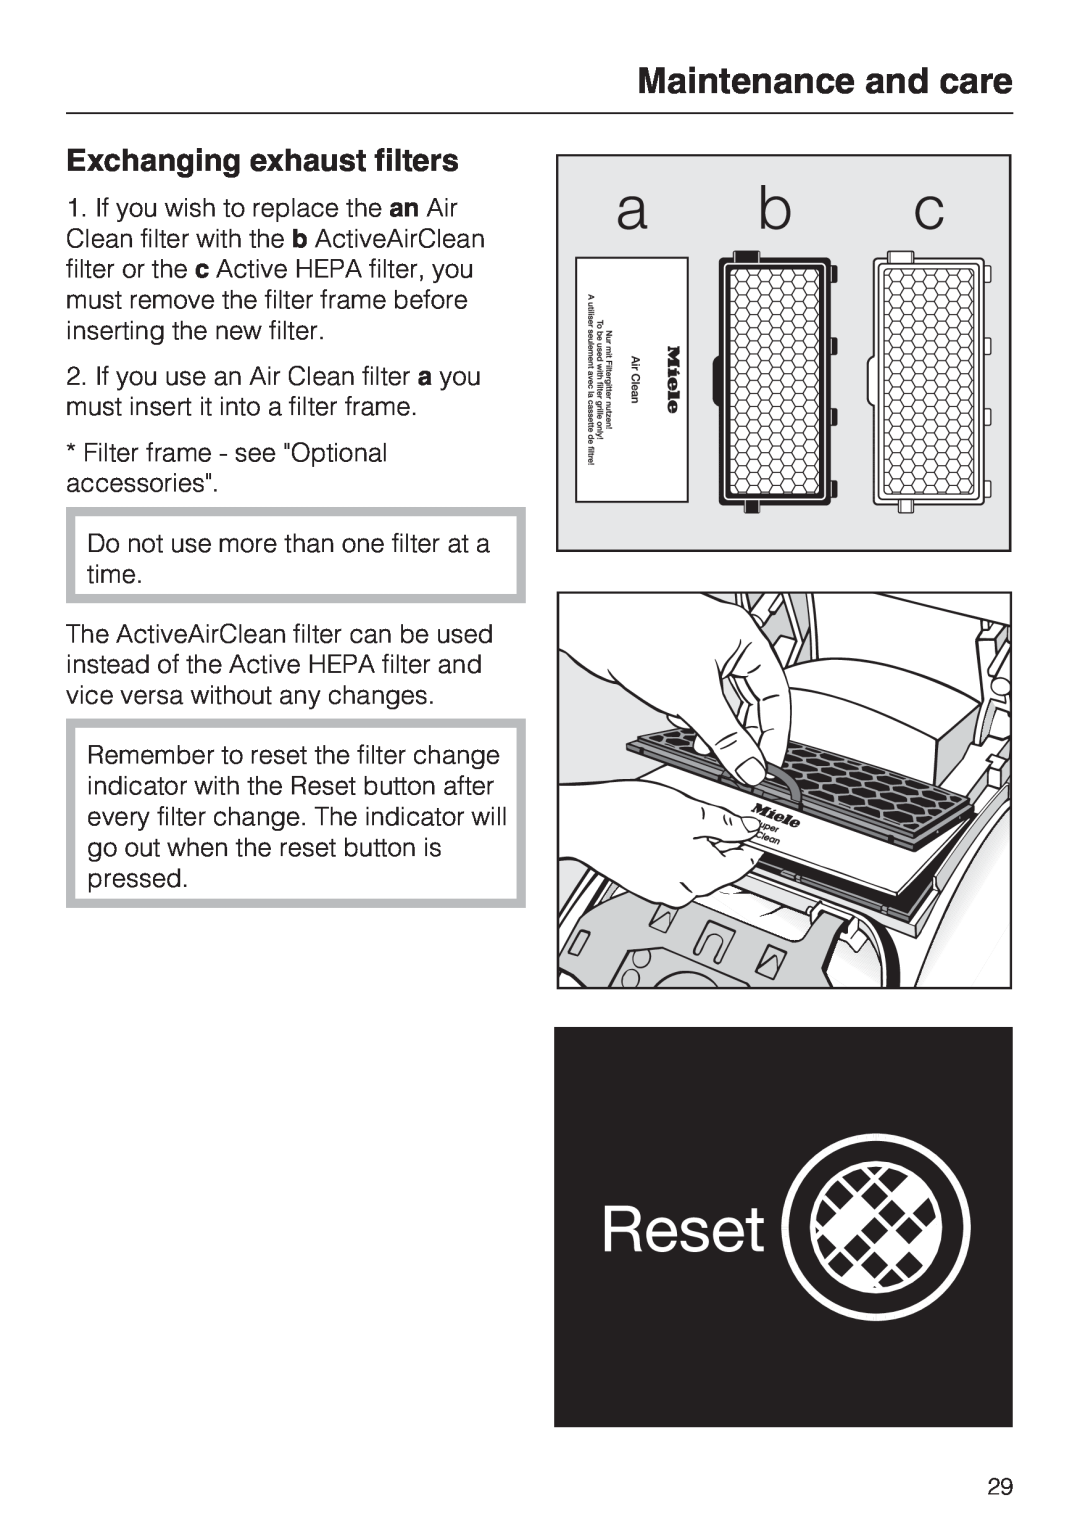 Miele S 4002 manual Maintenance and care, Exchanging exhaust filters 